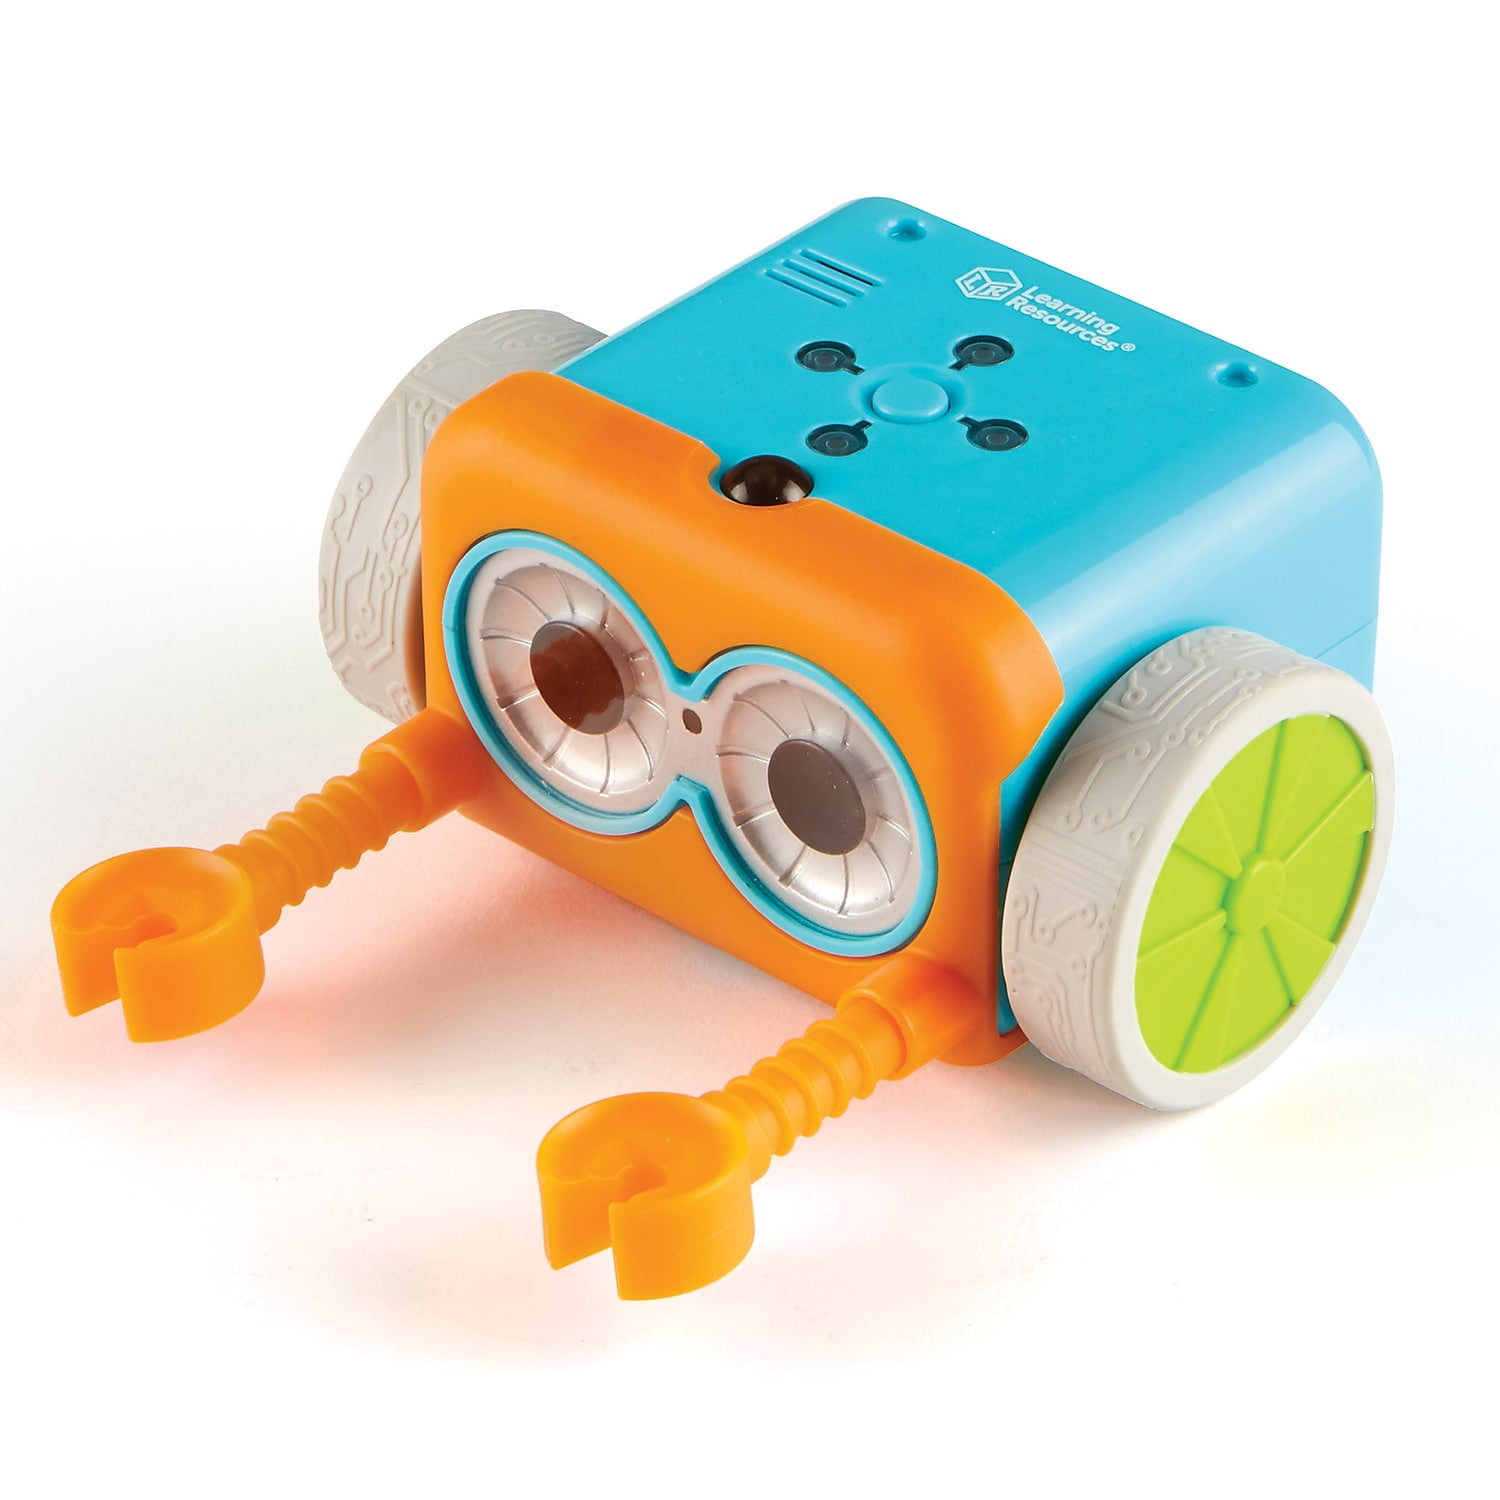 Learning Resources ® Botley™ the Coding Robot Activity Set